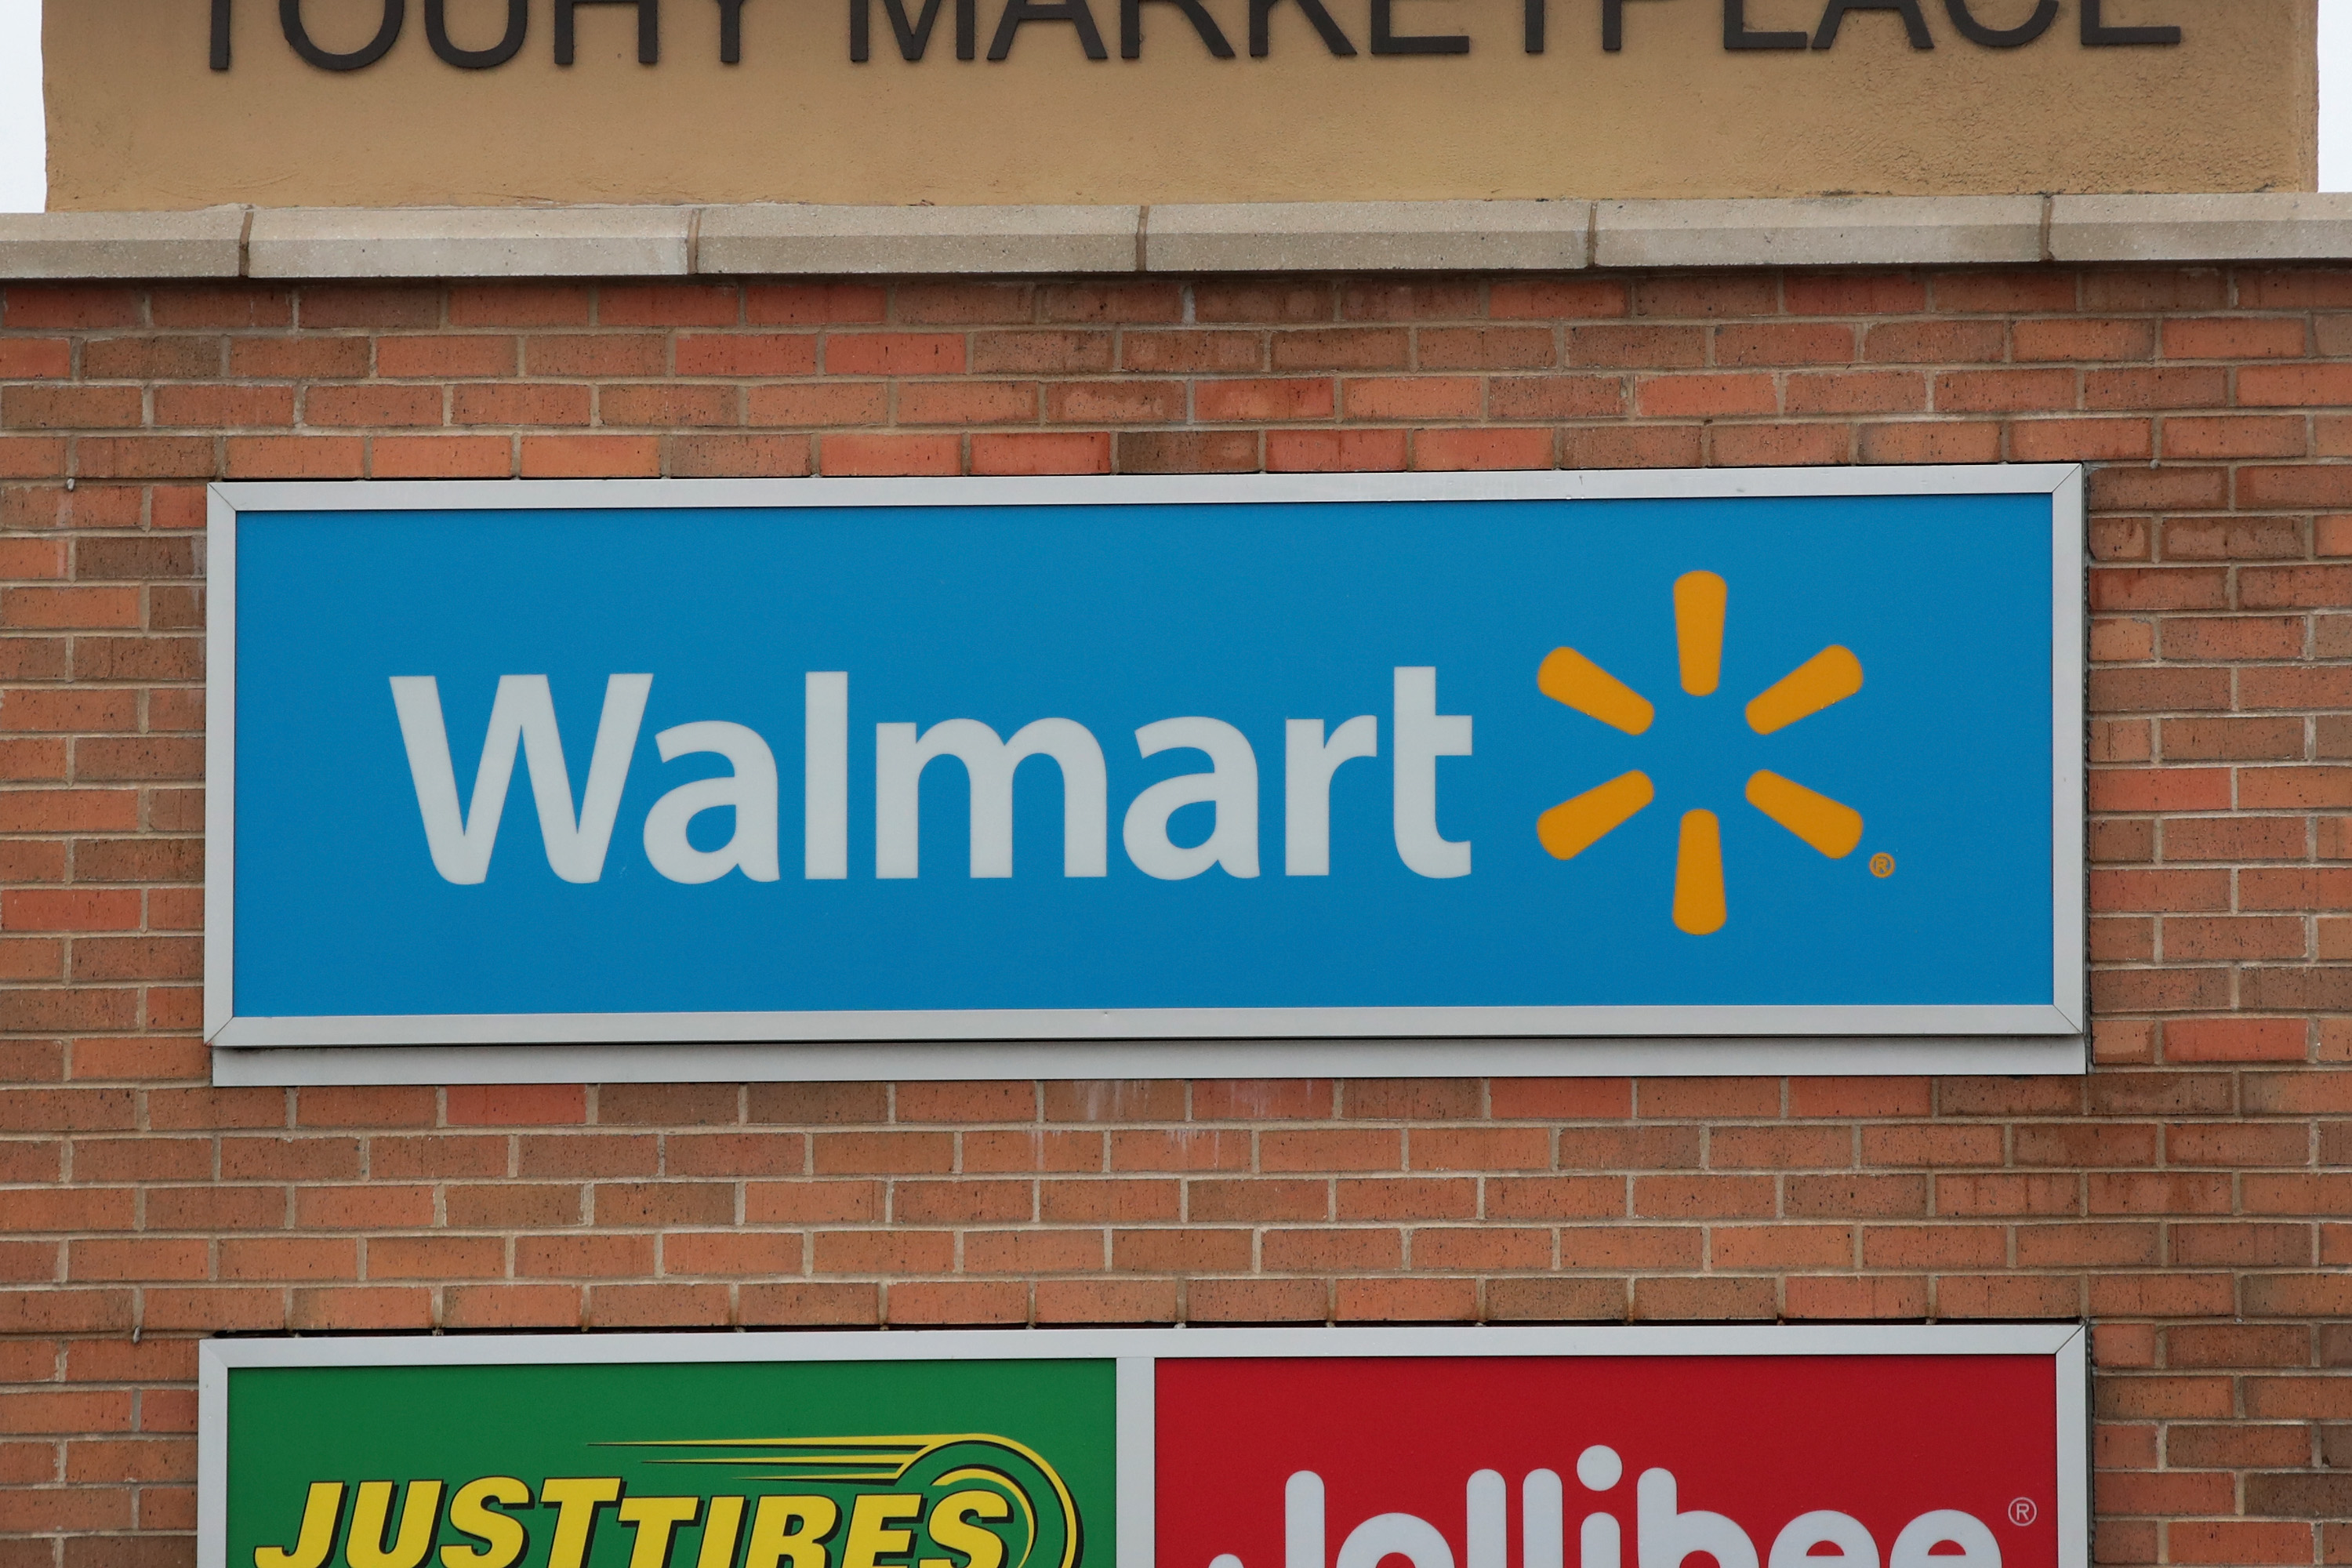 Want to Skip the Line at Walmart? There’s an App for That